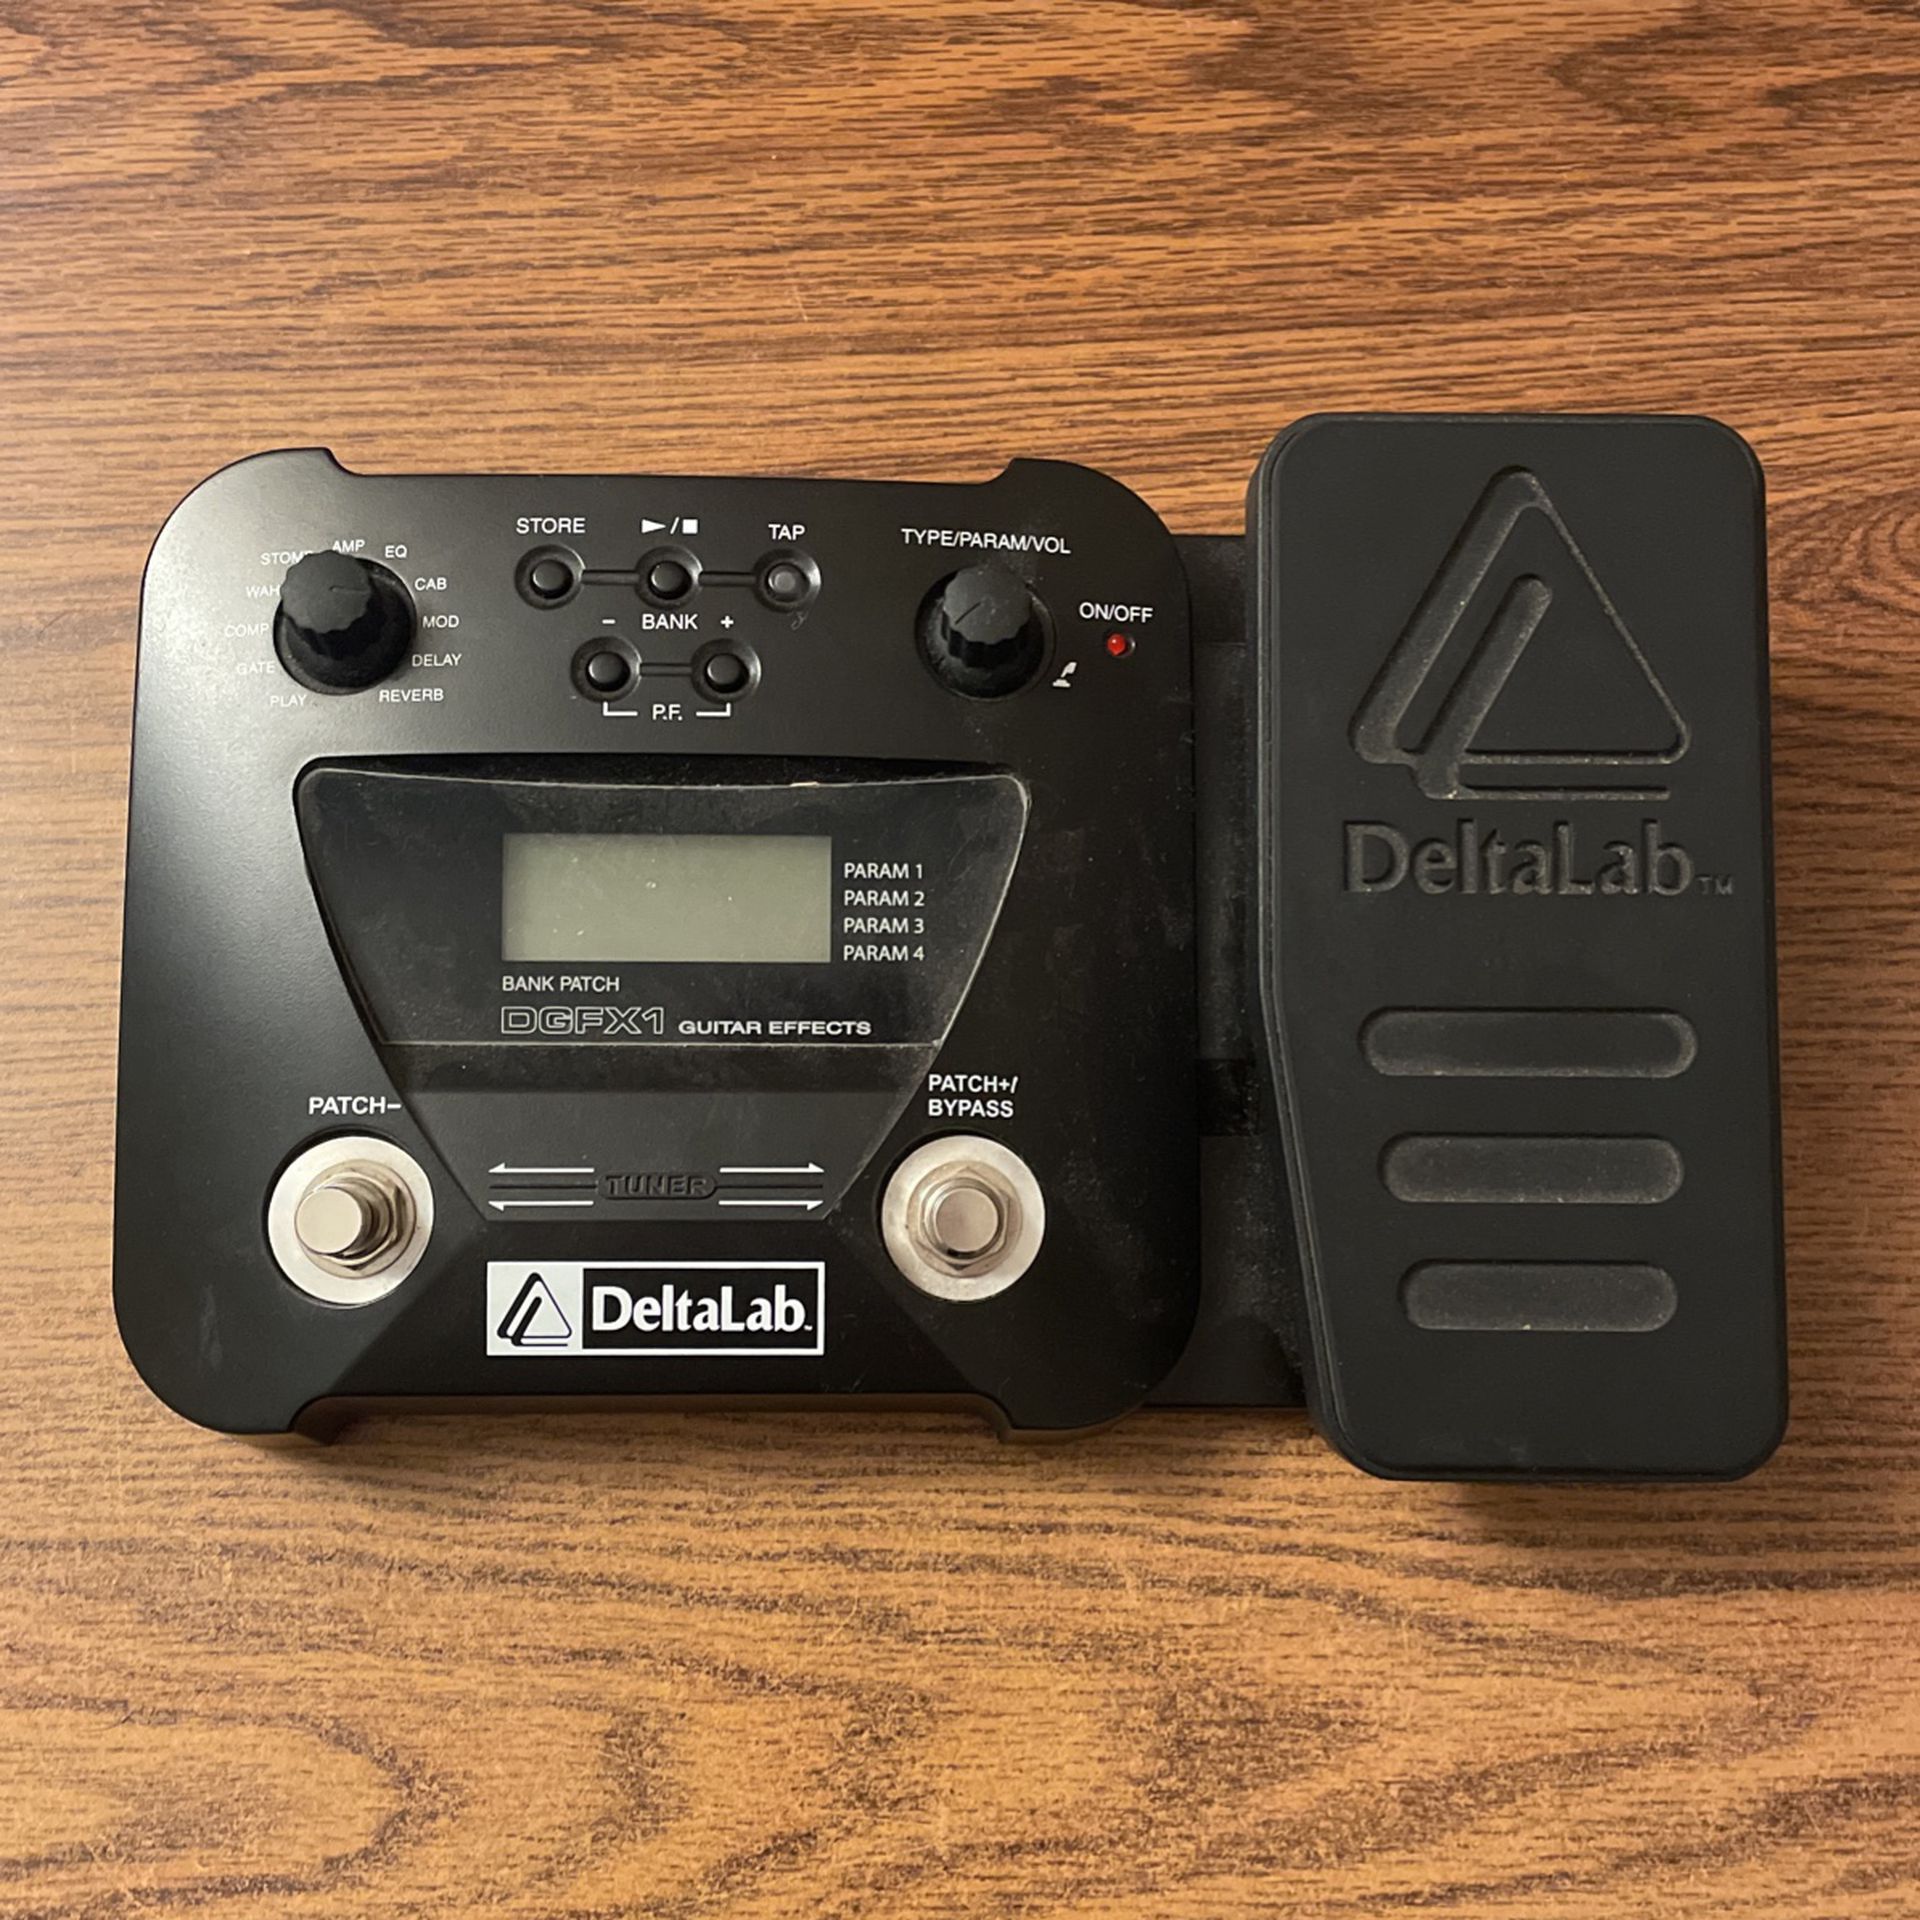 Delta Lab DGFX1 Guitar Multi-effects Pedal (see post for more details)